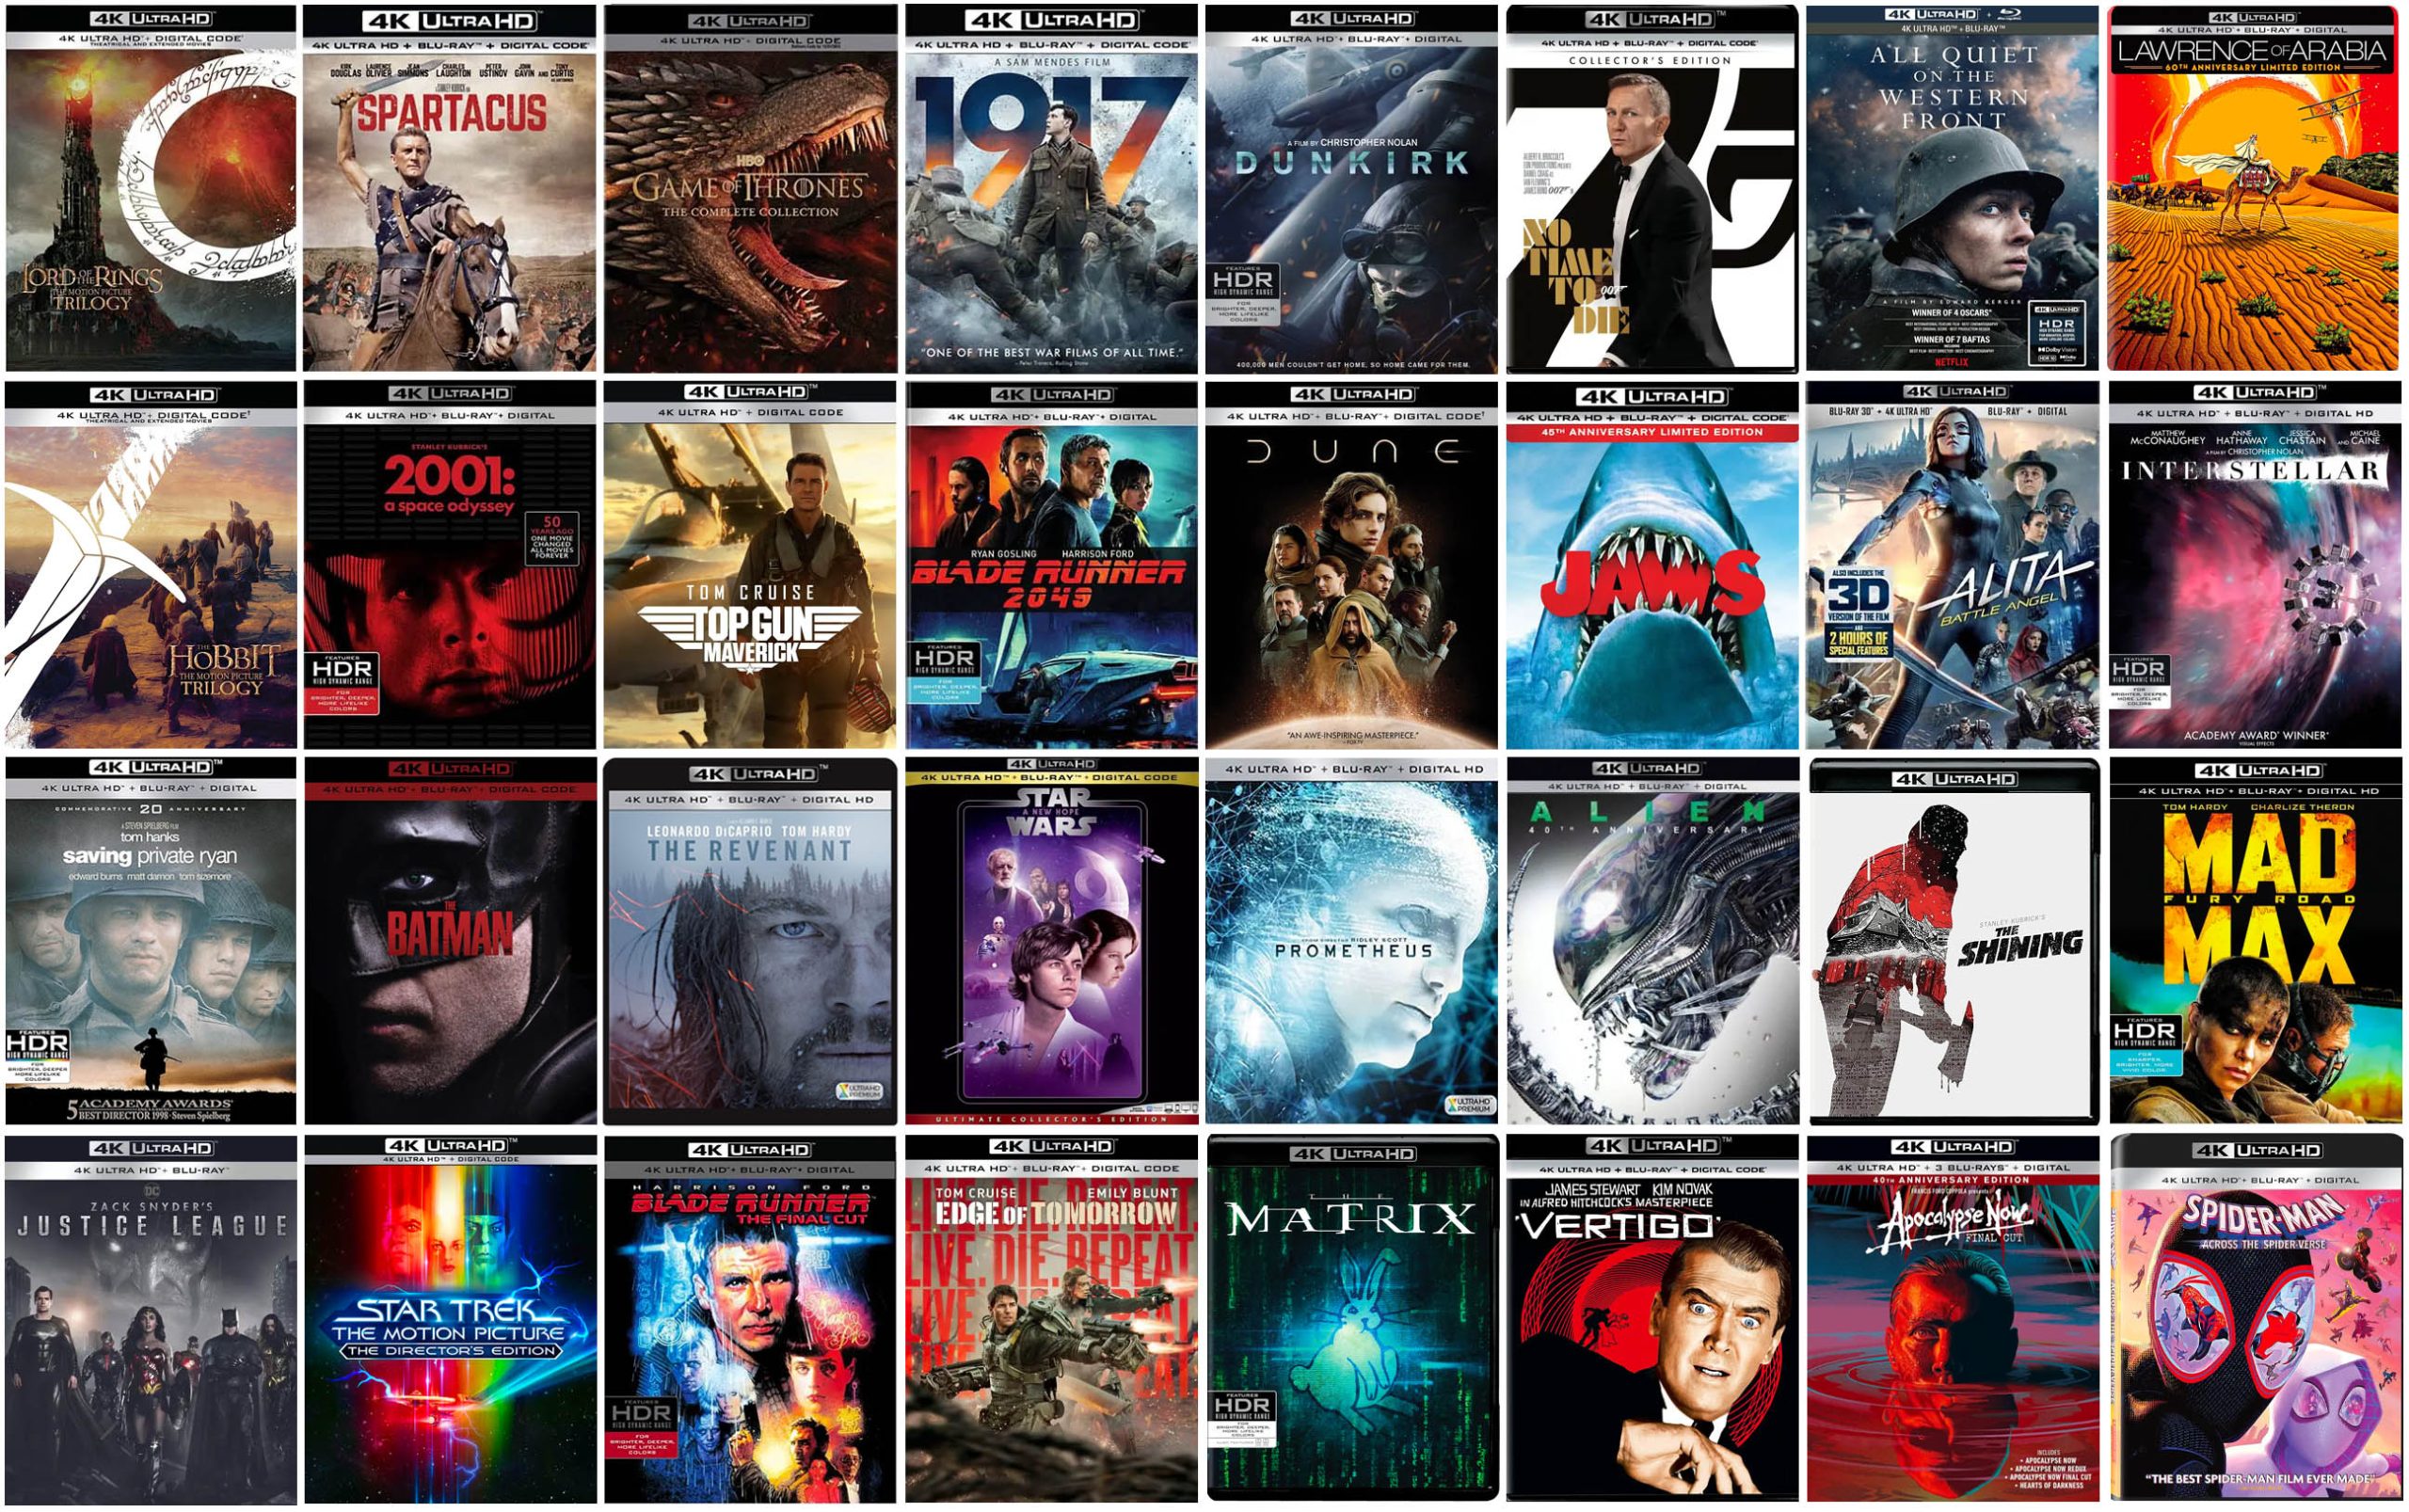 The Best 4k Blu-ray Discs Of All Time